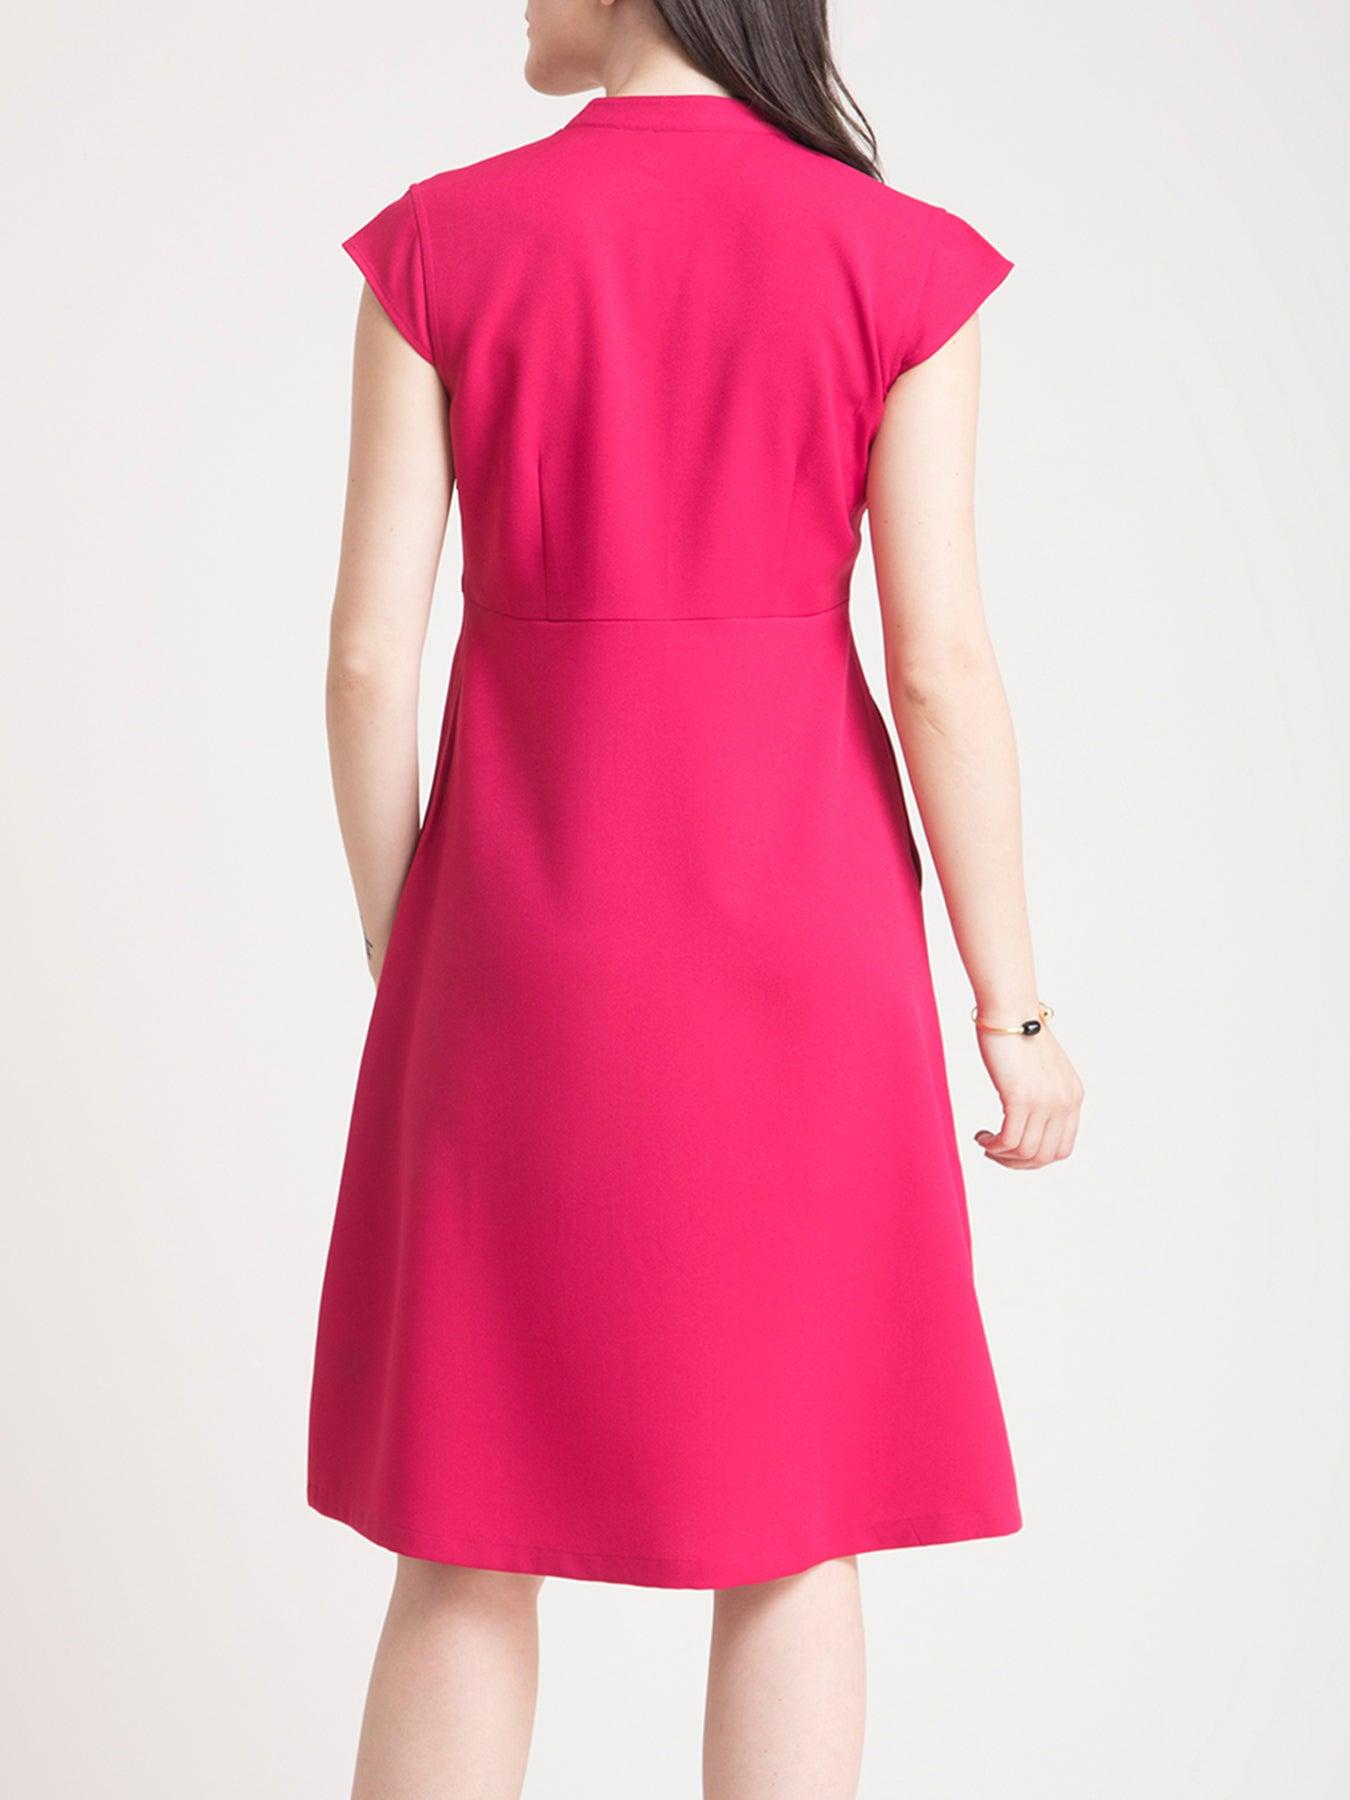 Stylised Neck Belted Fit and Flare Dress - Fuchsia Pink| Formal Dresses